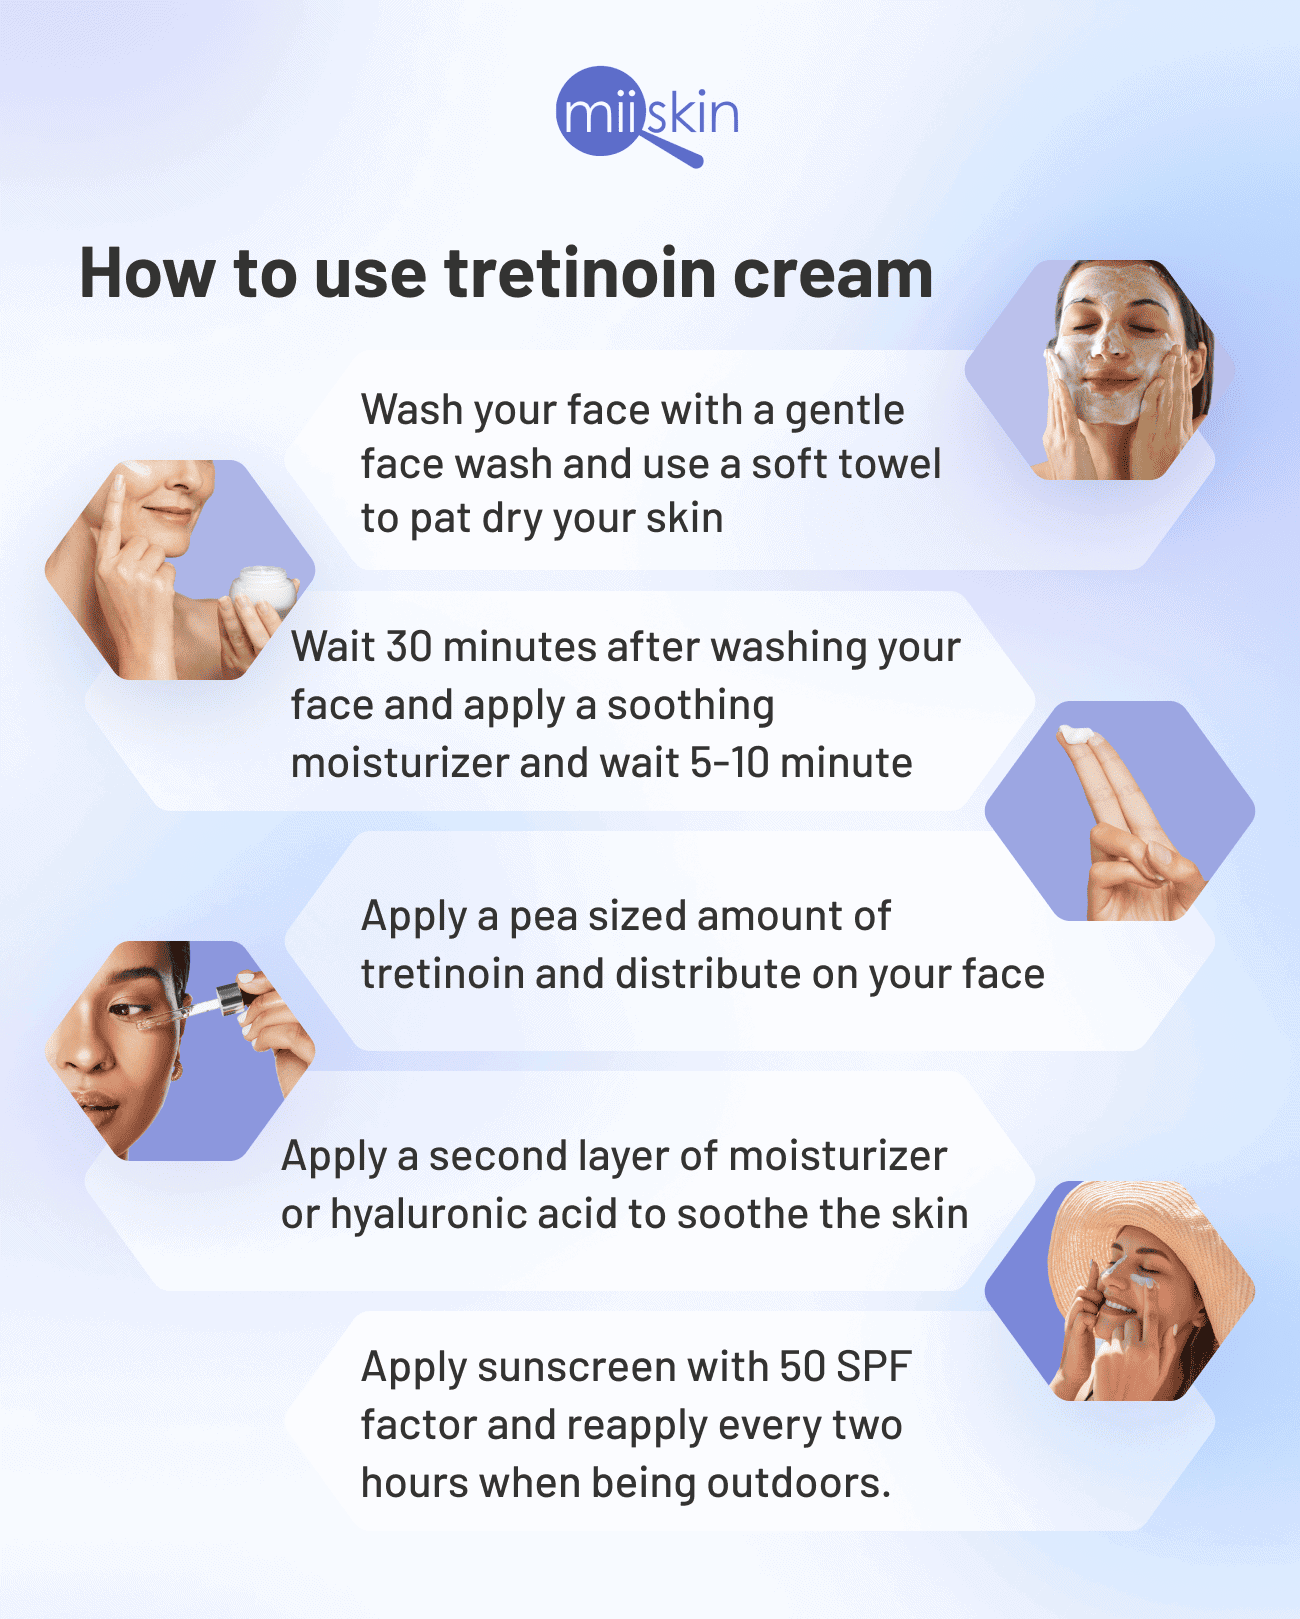 Best Way to Use Tretinoin Cream for Acne